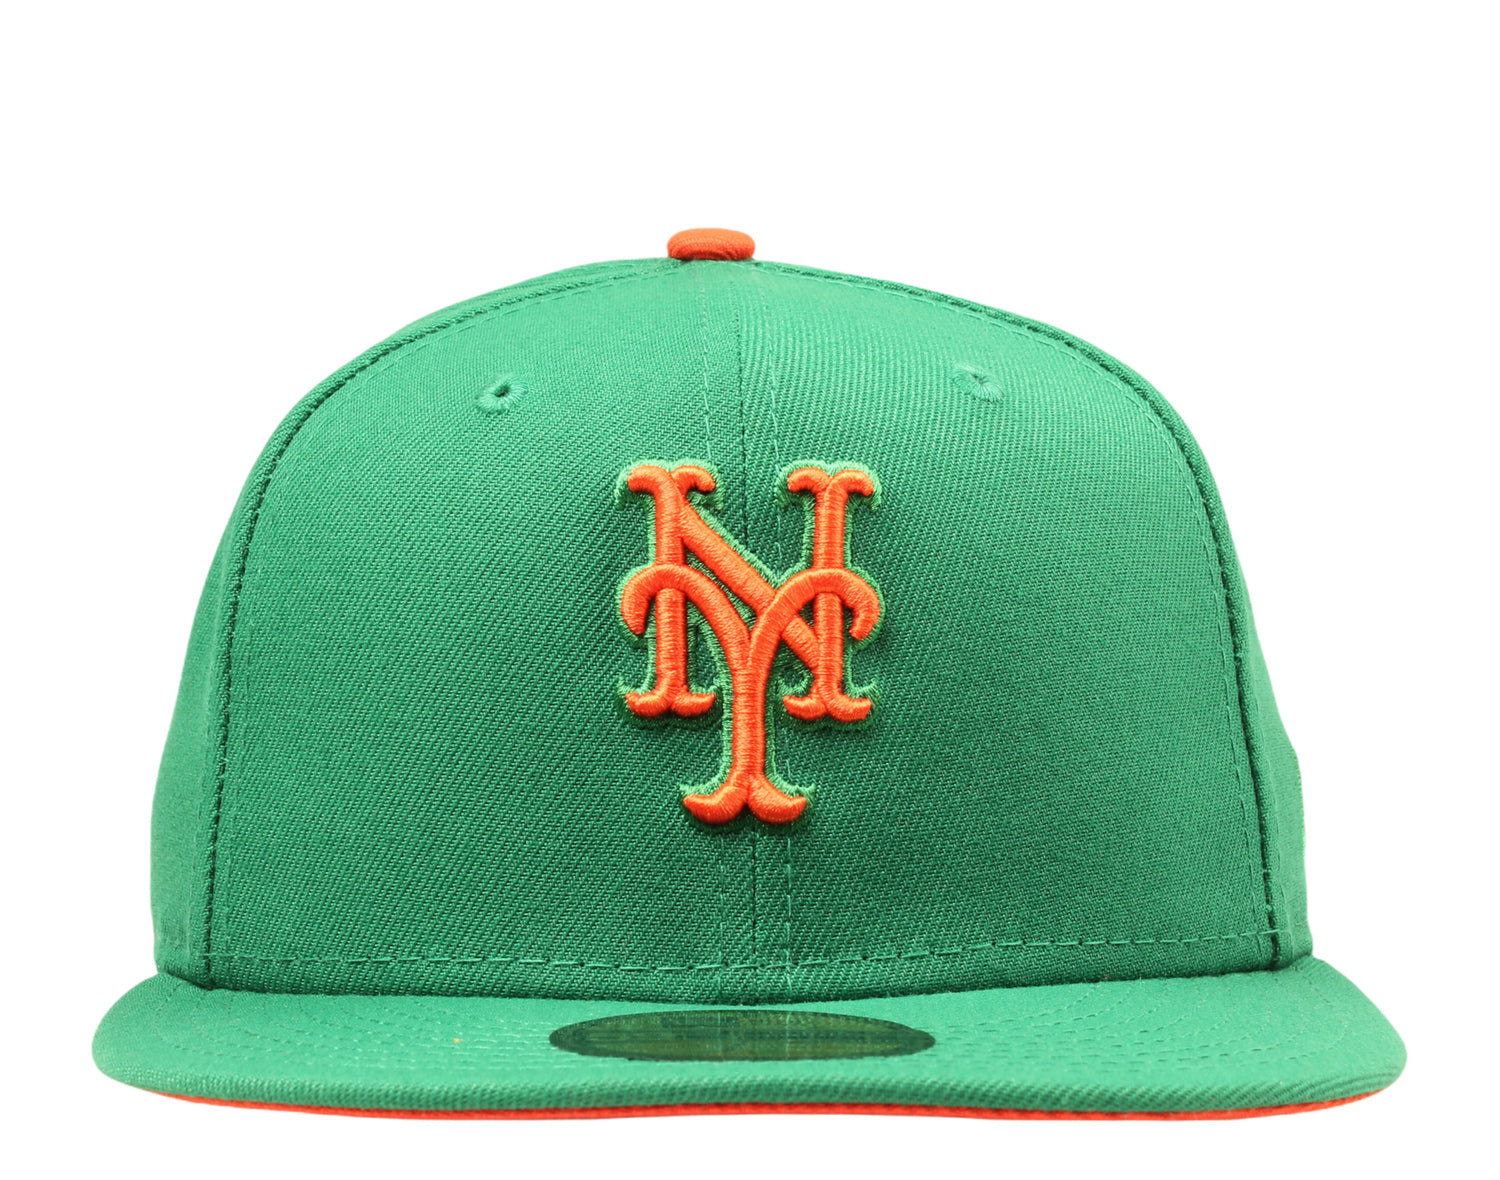 New Era x NYCMode 59Fifty MLB New York Mets Fitted Hat W/ Orange Undervisor